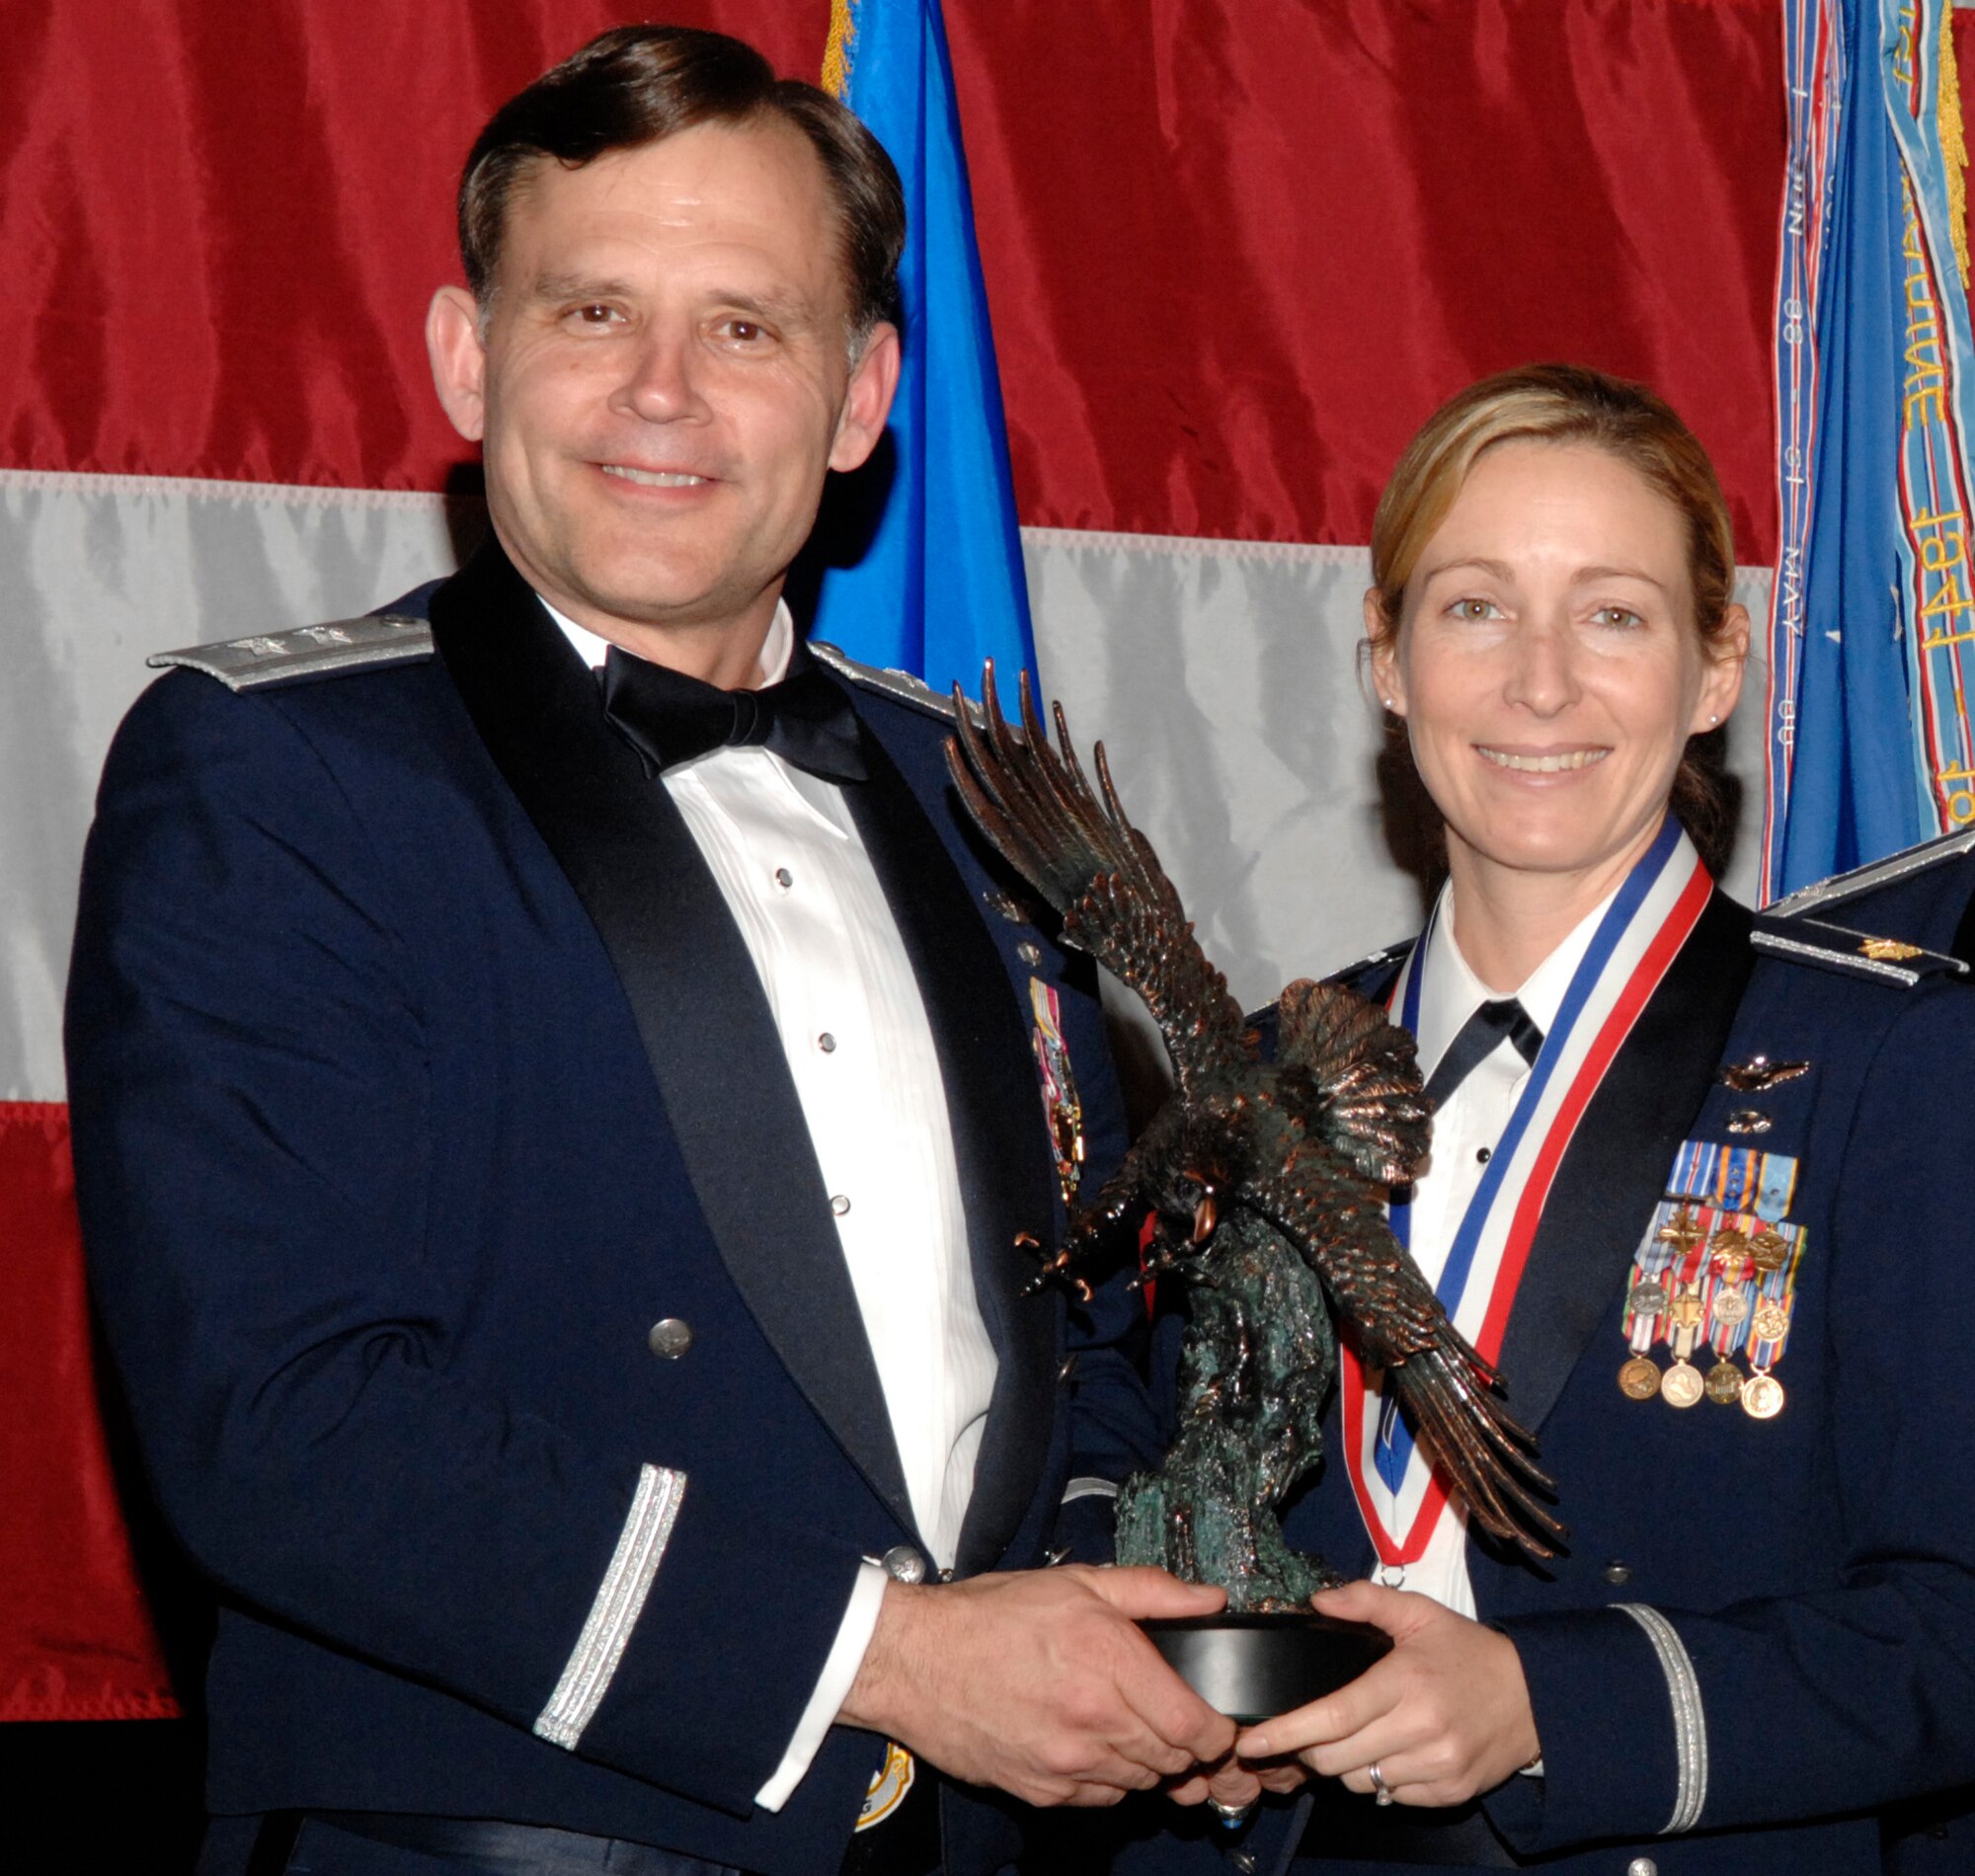 Maj. Kim Campbell, 422nd Test and Evaluation Squadron, won the 53d Wing Field Grade Officer of the Year Award during the annual awards banquet Jan. 31 at the Emerald Coast Conference Center.  The night’s guest speaker and former 53d commander, Maj. Gen. (retired) Jack Catton (left) presented the awards.  U.S. Air Force photo.